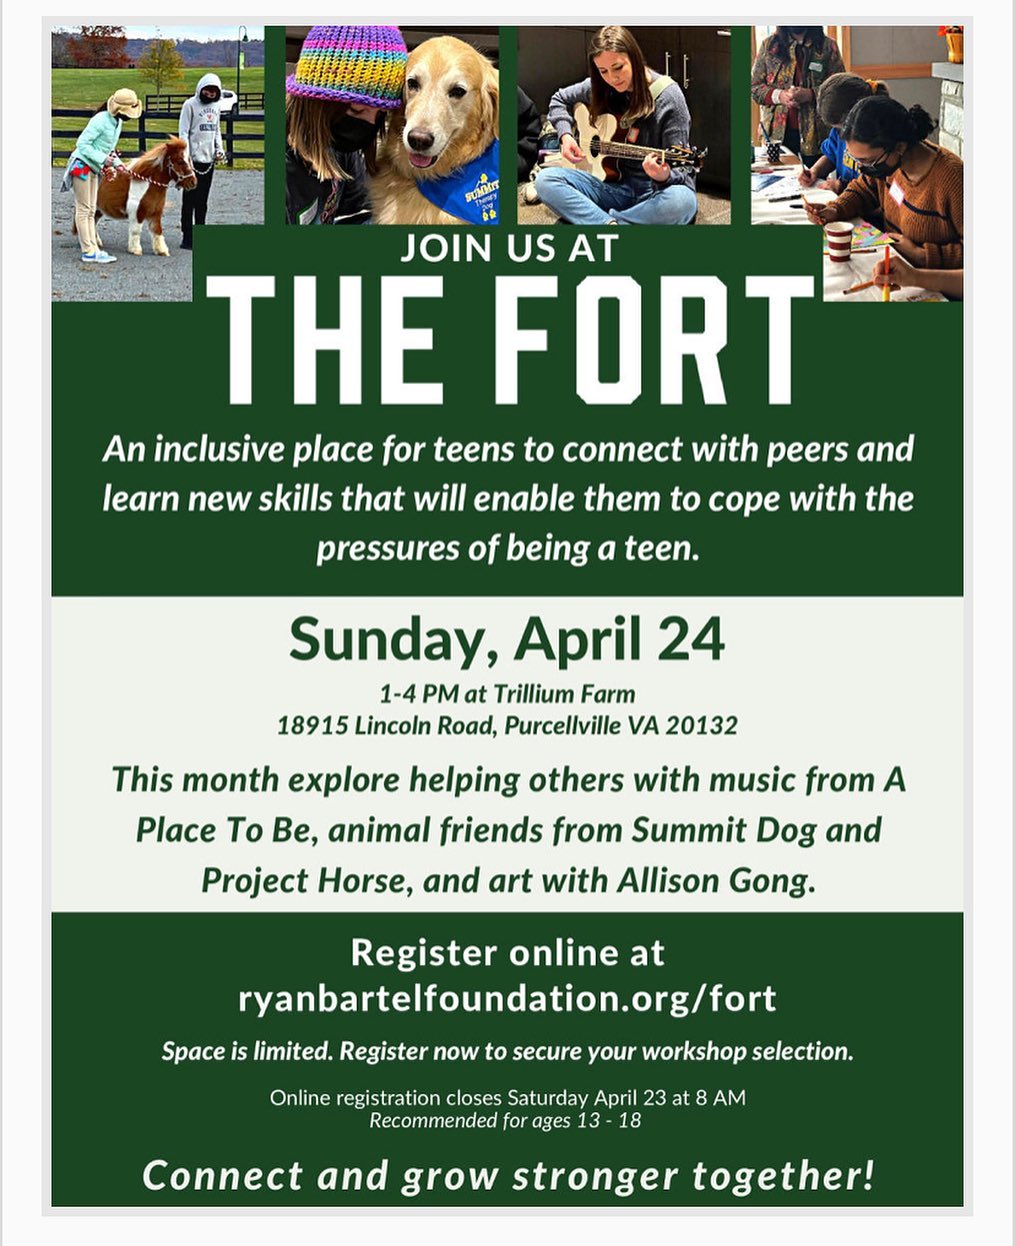 The Fort is a great resource for teens to get extra support and connection with their peers, @ryanbartelfoundation @summitdogva @aplacetobeva